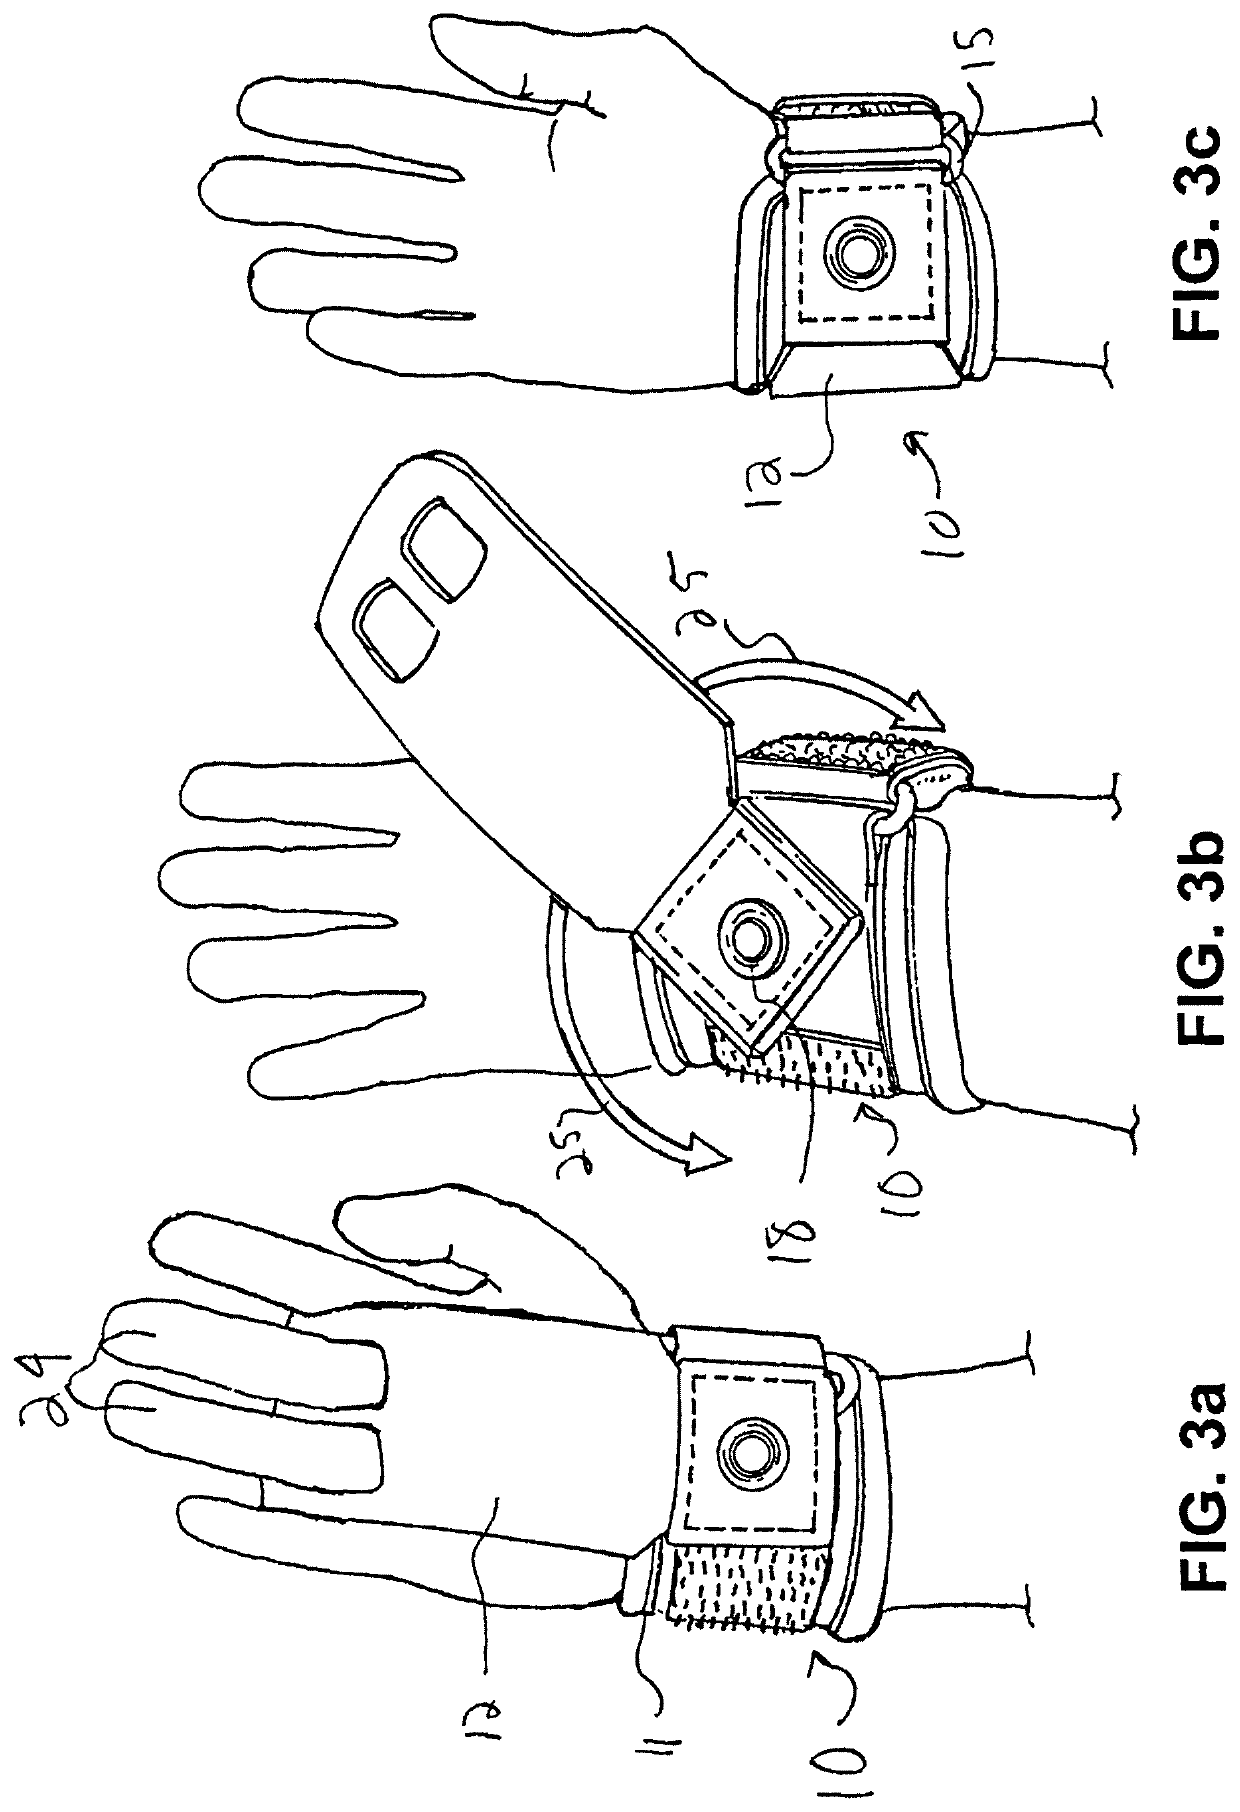 Wrist Support With Rotating Hand Grip